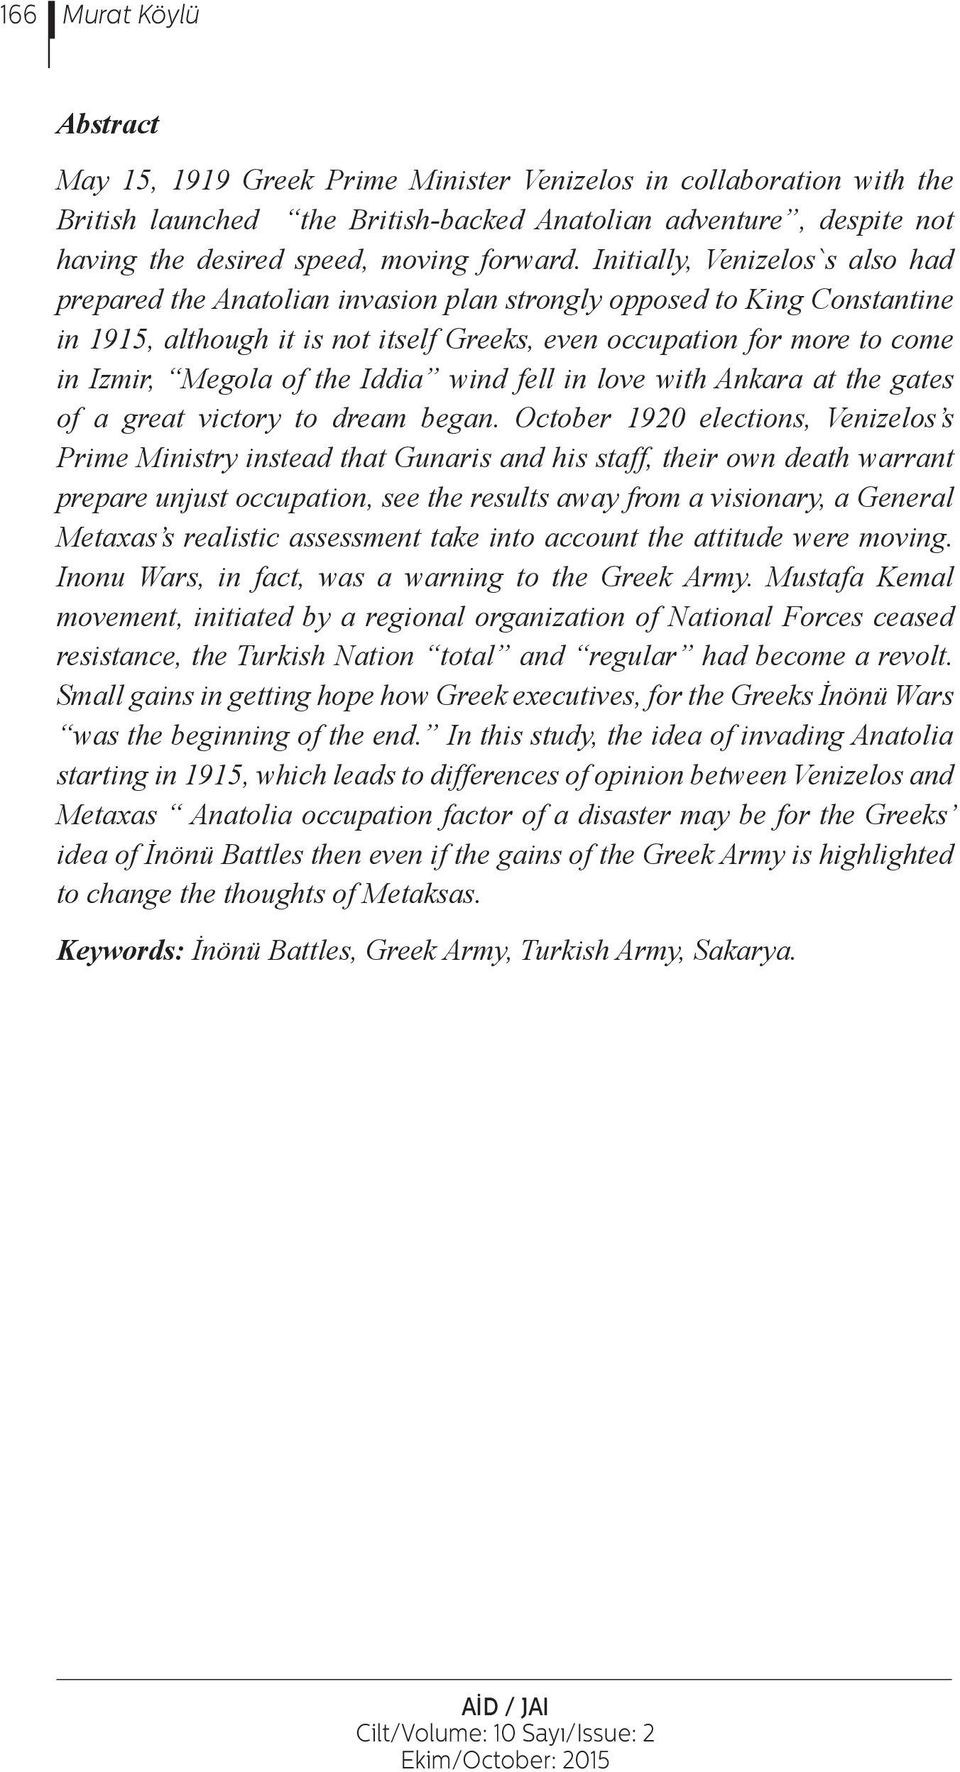 Initially, Venizelos`s also had prepared the Anatolian invasion plan strongly opposed to King Constantine in 1915, although it is not itself Greeks, even occupation for more to come in Izmir, Megola